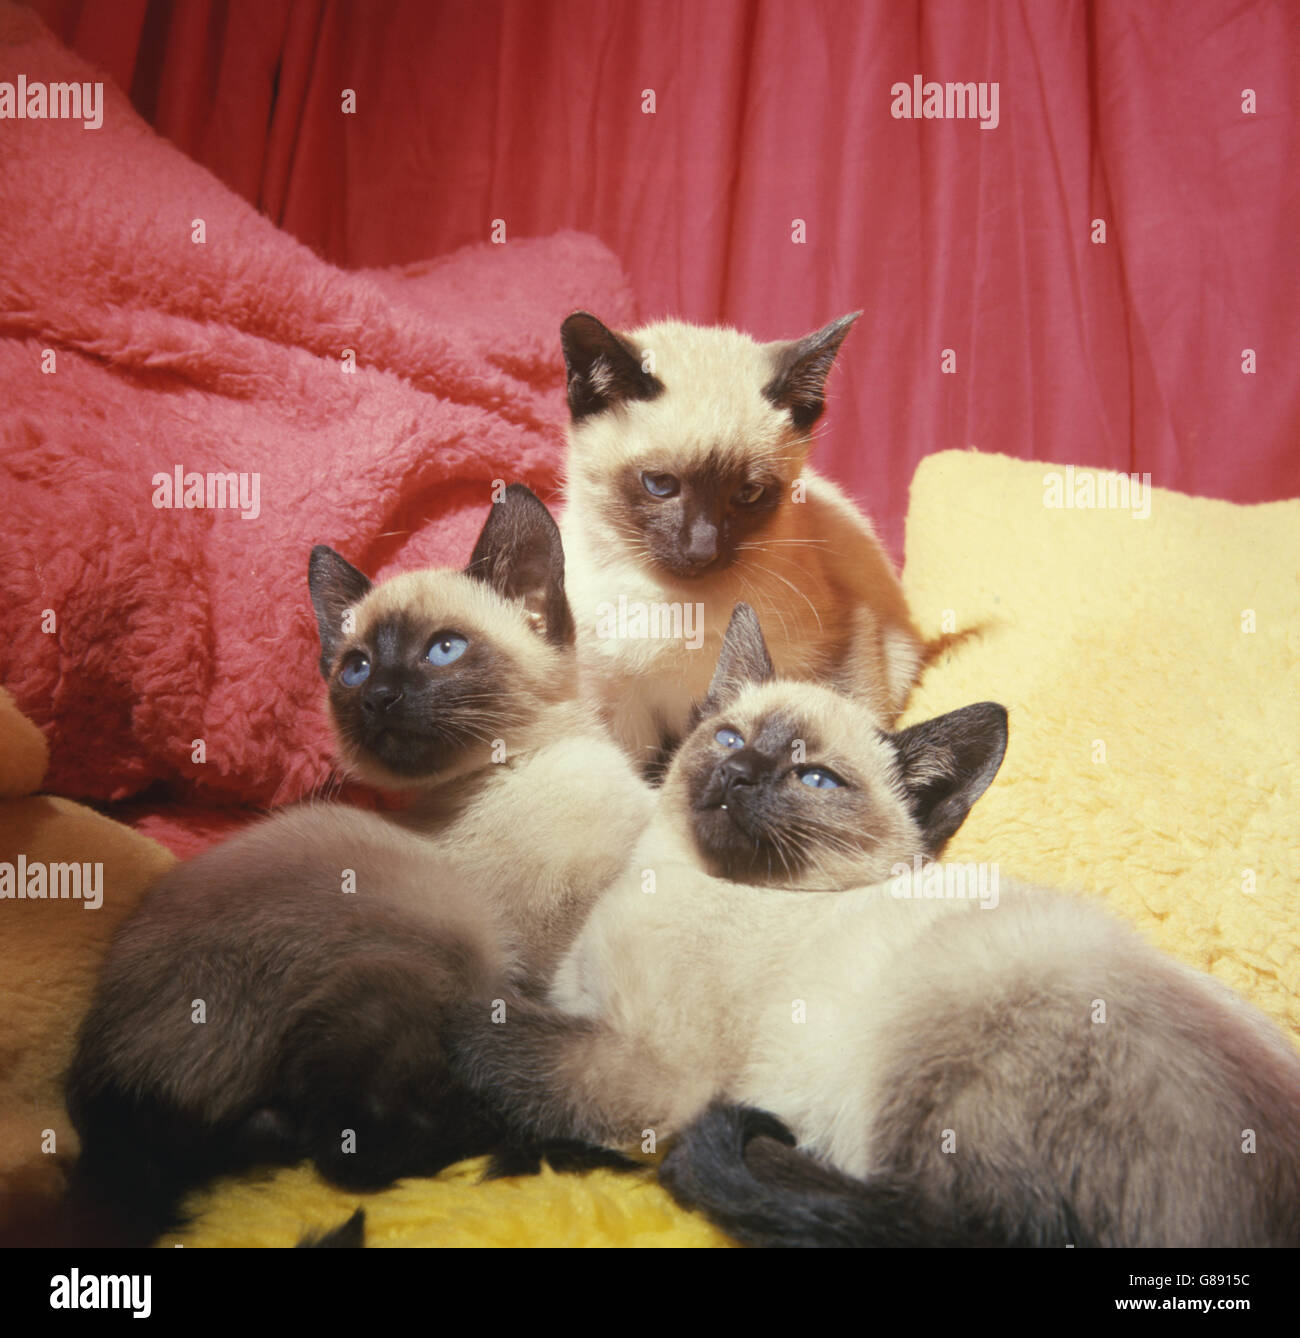 Animals - National Cat Show - London. A litter of Seal-pointed Siamese kittens at the National Cat Show in London. Stock Photo